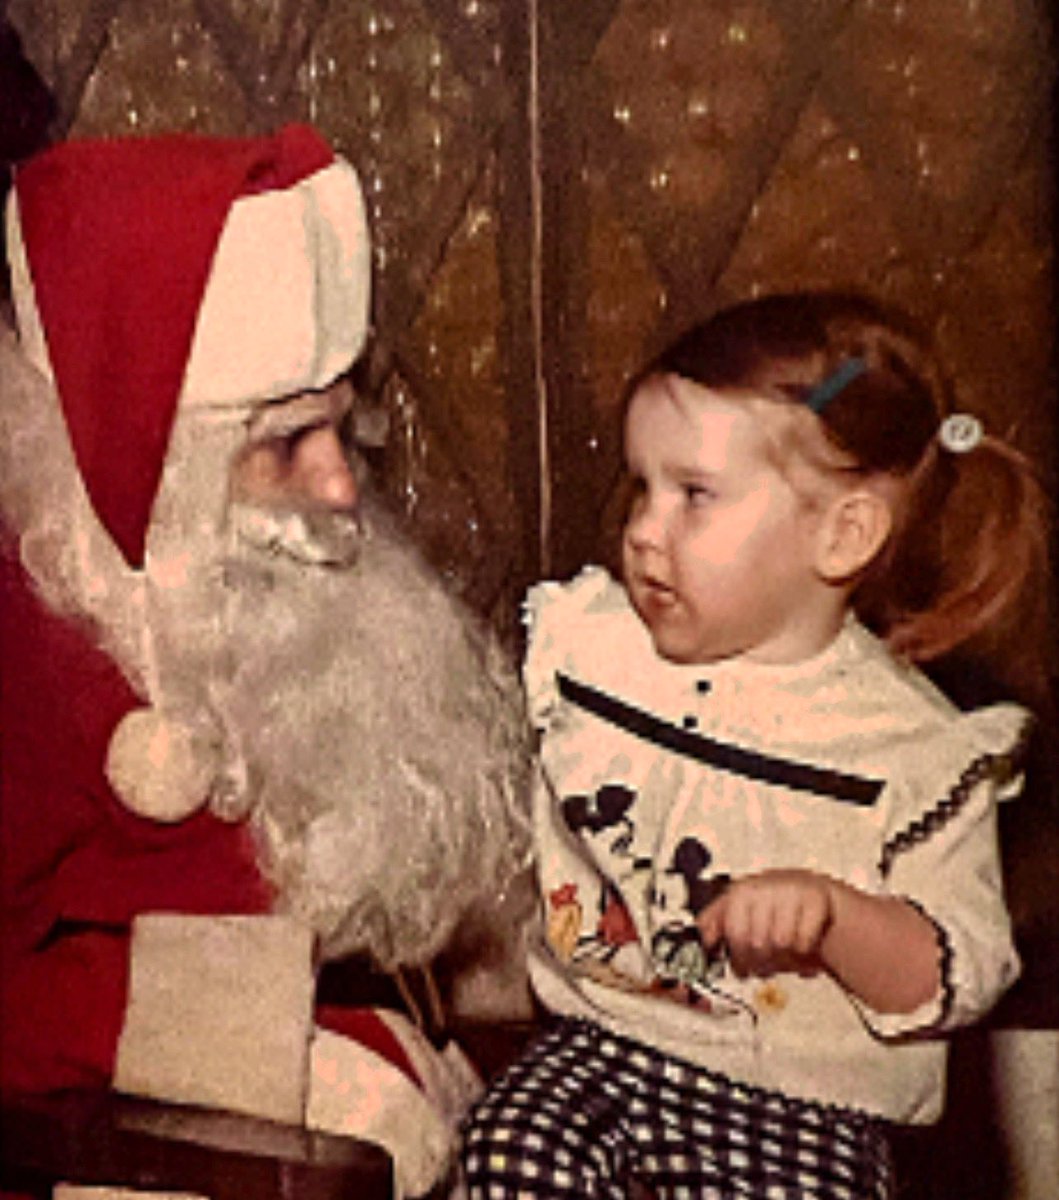 “Are you really Santa? Before I tell you what I want for Christmas, I’m going to need to see some identification first…” 
🎄🎅🏼👧🏻 😆
#Christmas  #ChristmasMemories